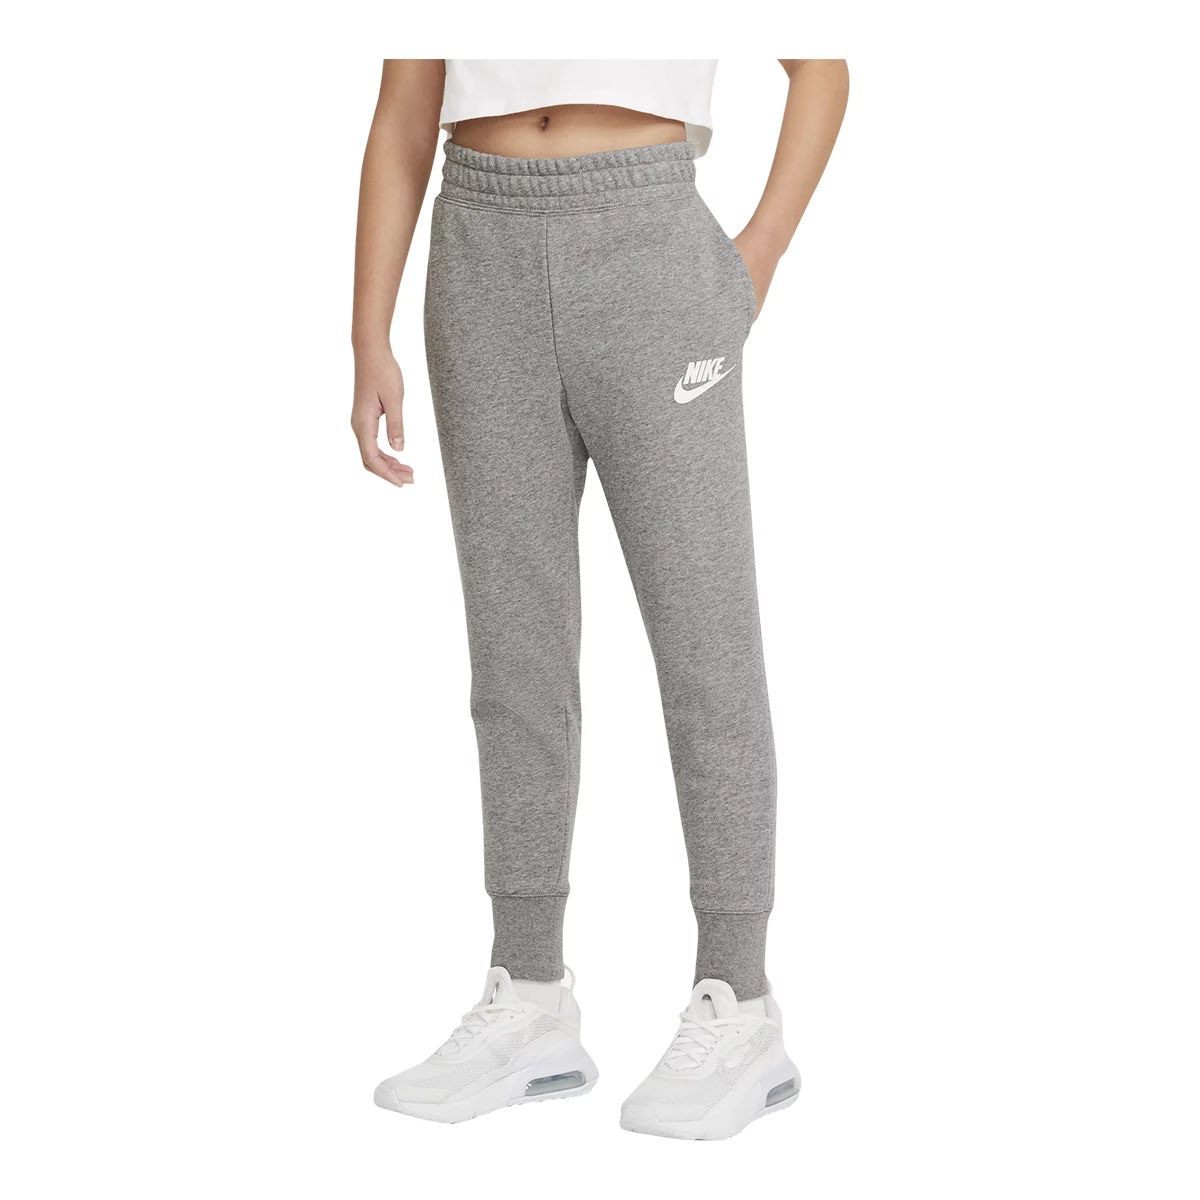 Nike Girls' Club French Terry Sweatpants  Kids' High Waisted Athletic Training